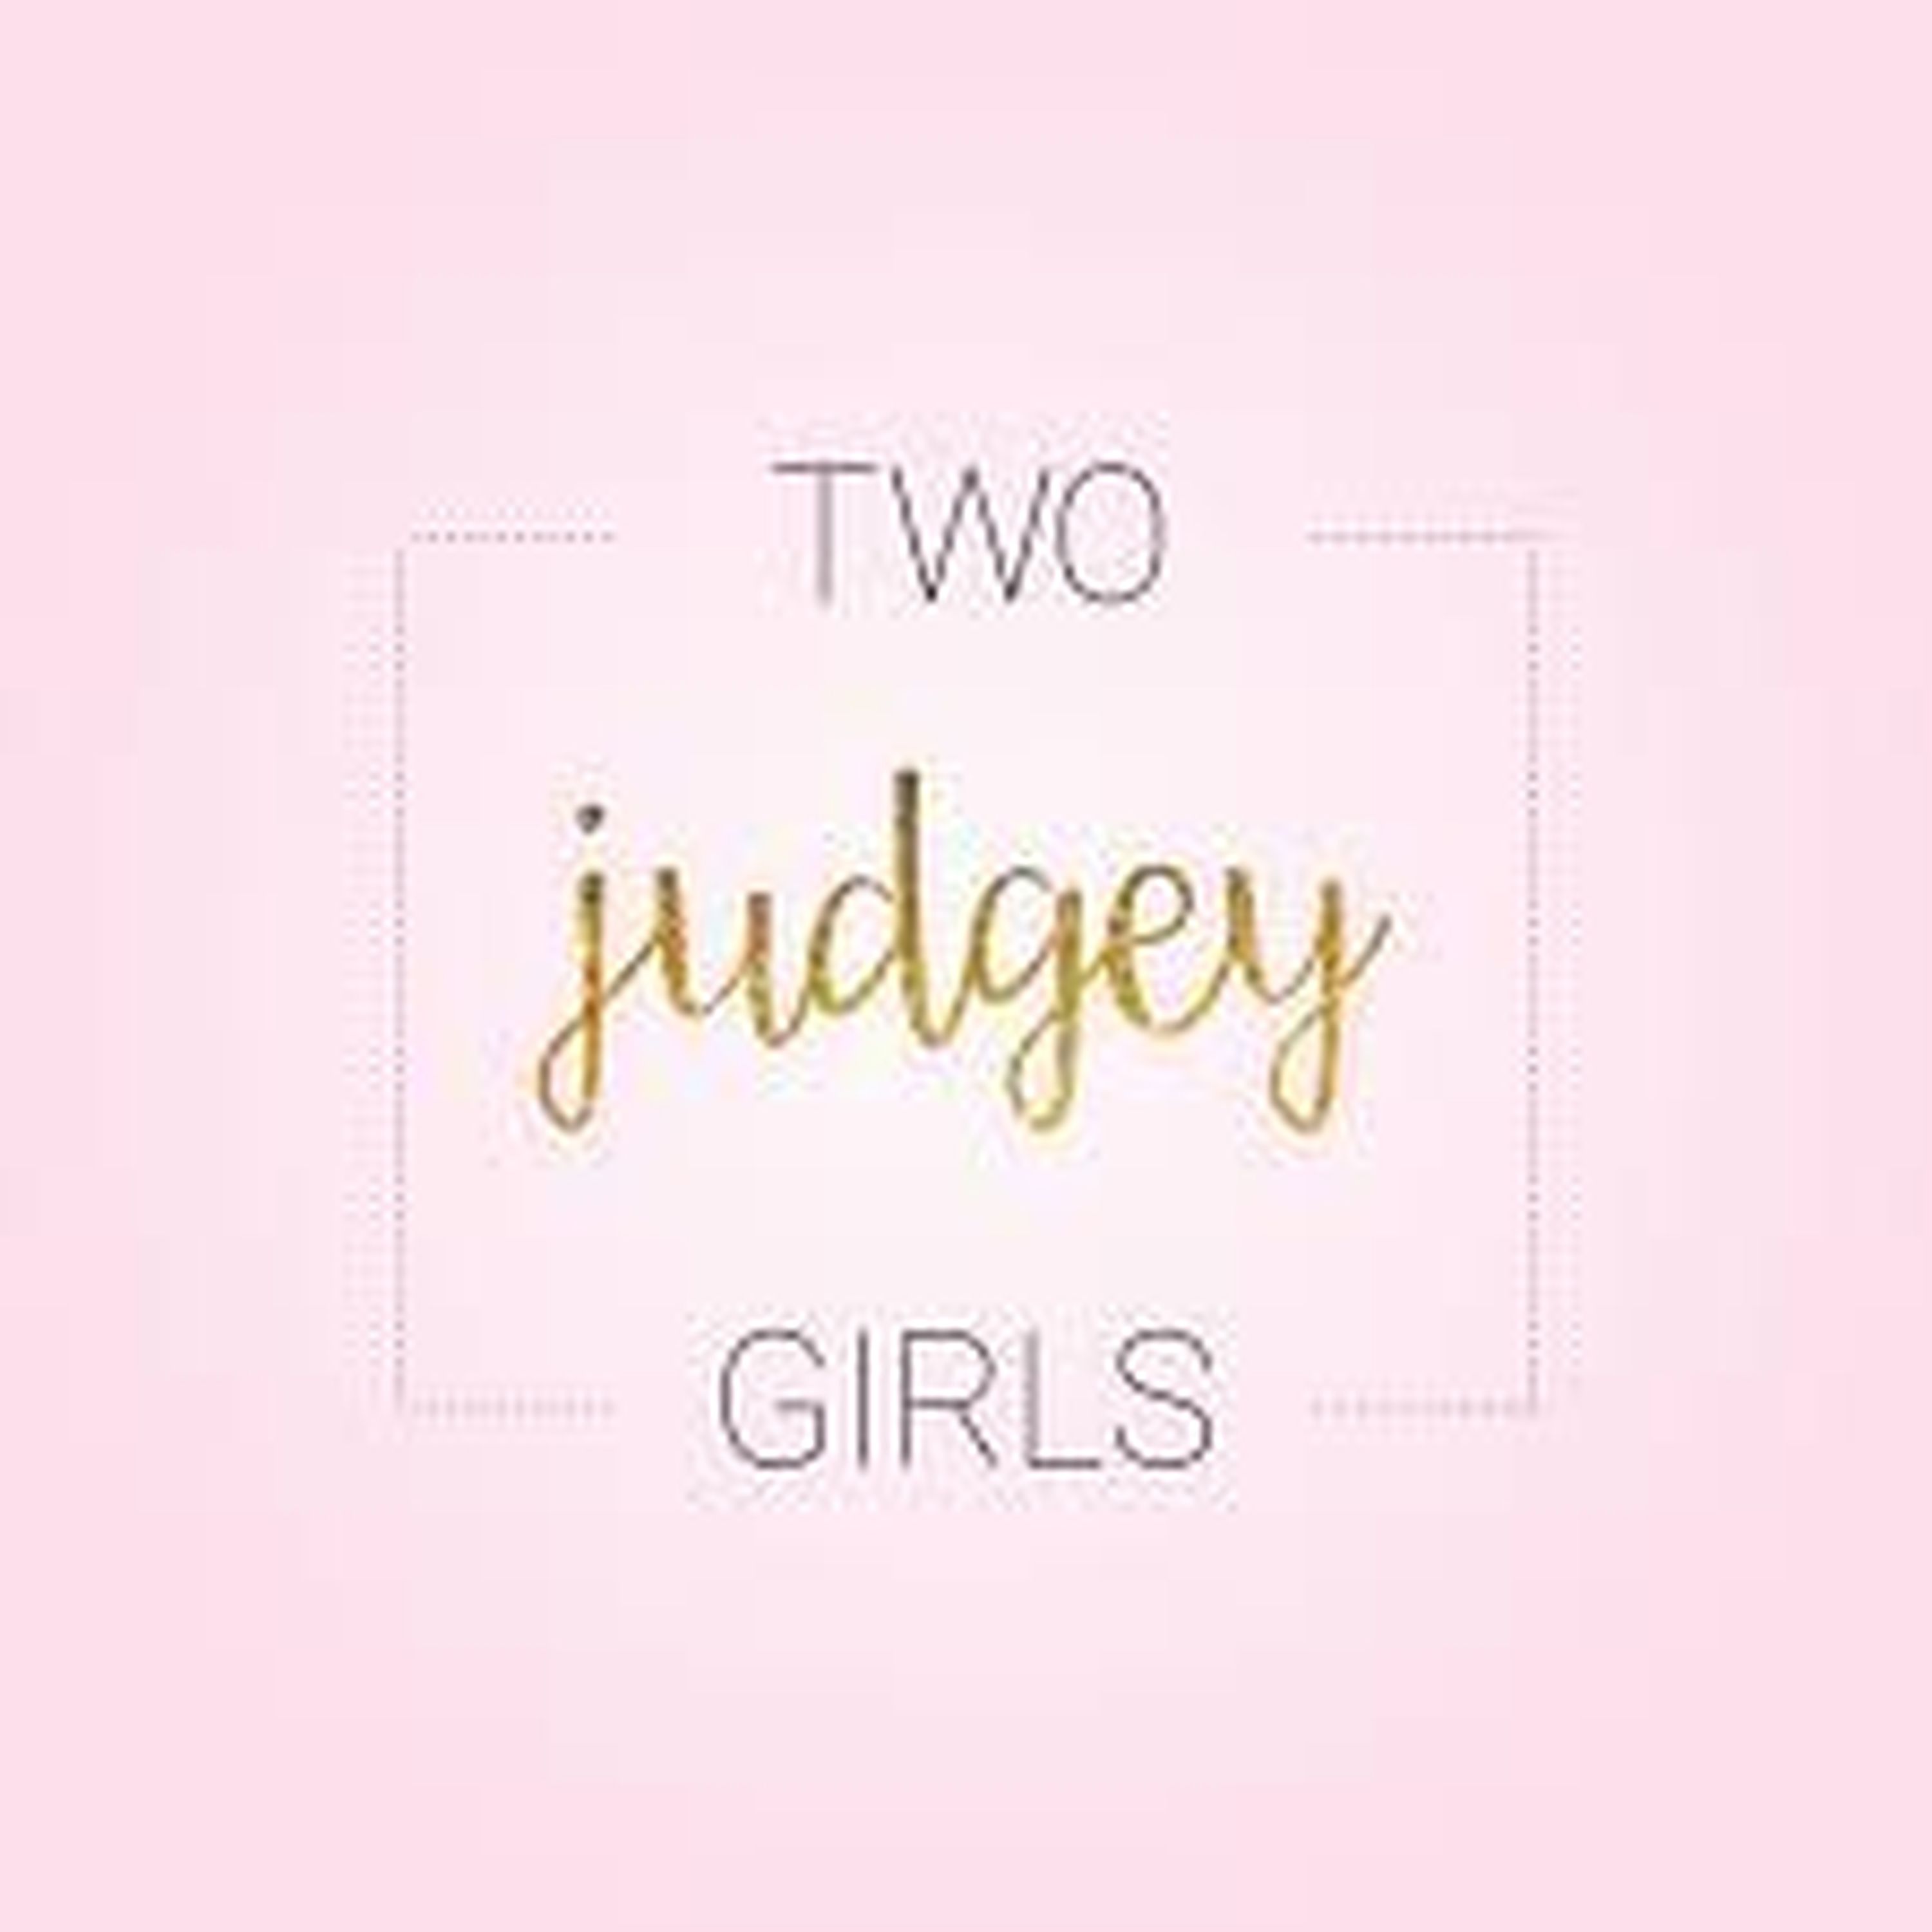 Ep117: Two Judgey Girls